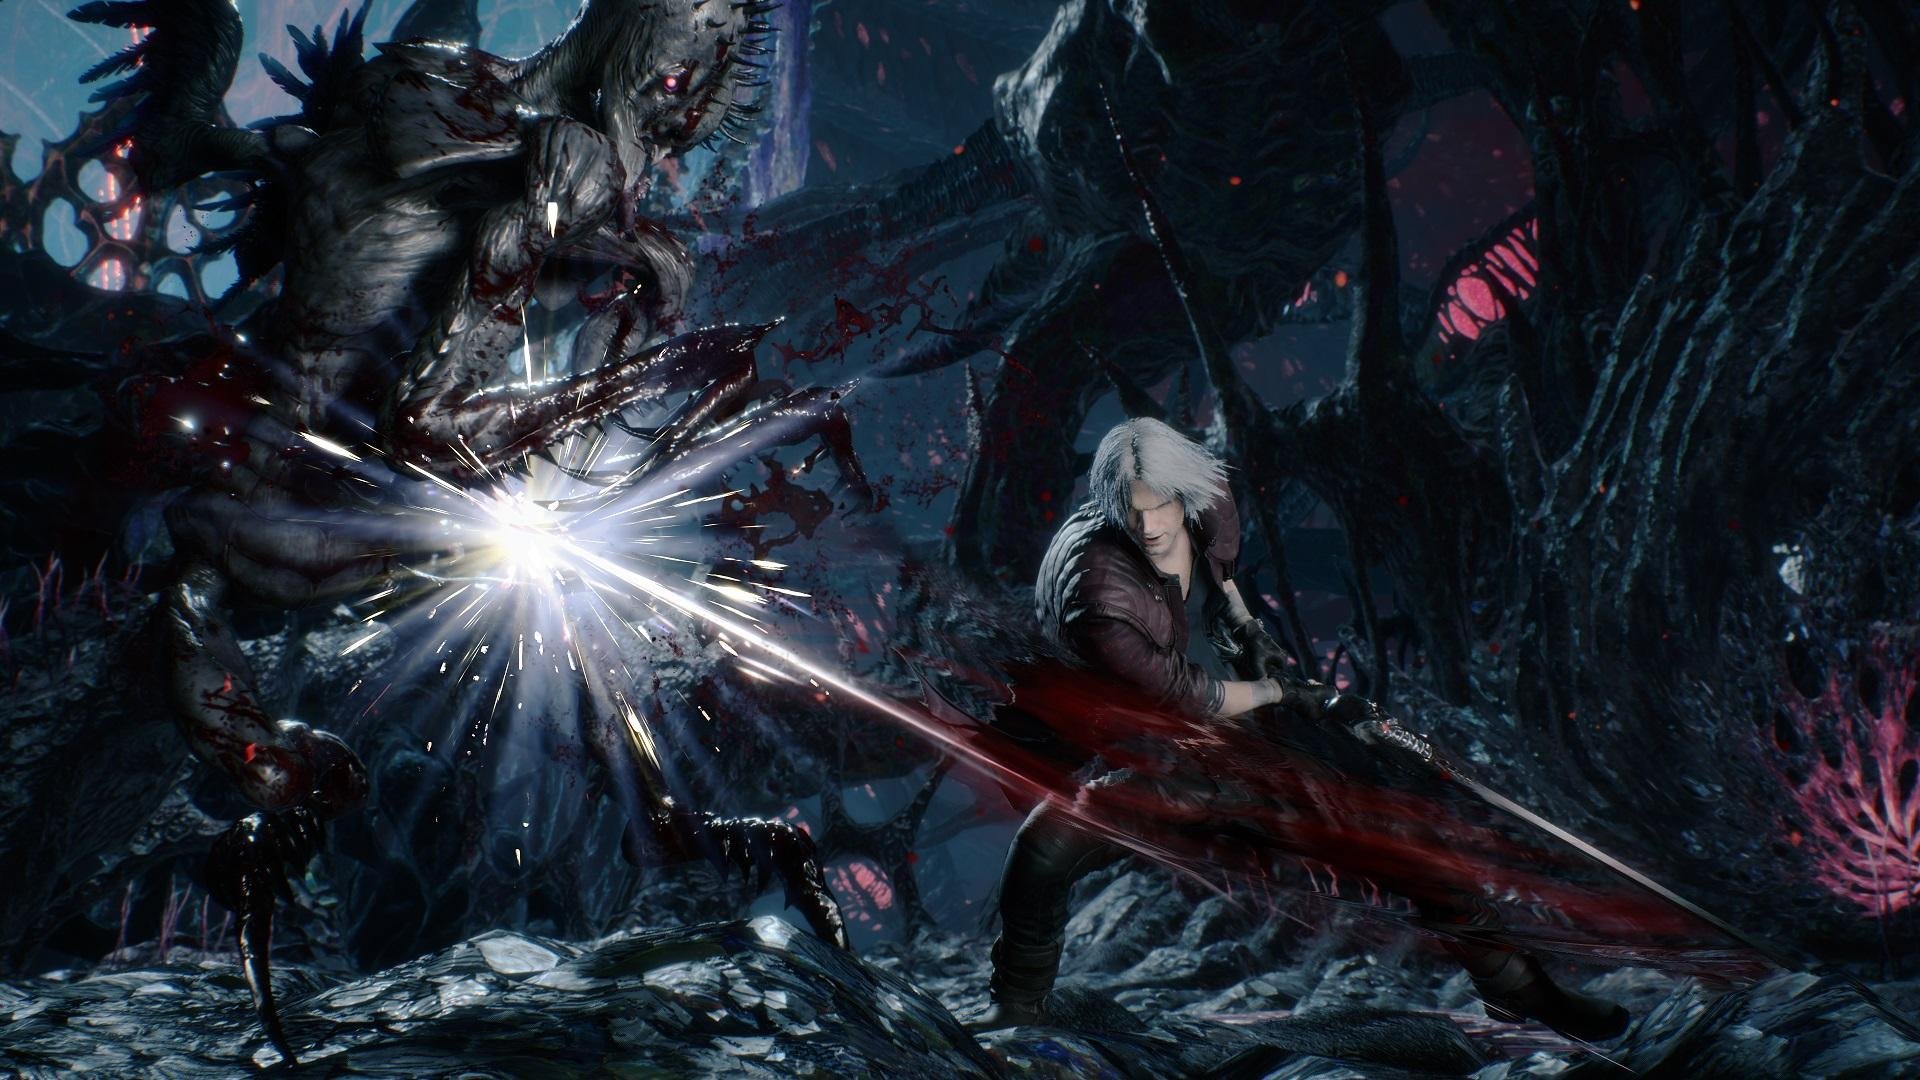 DmC: Devil May Cry brings the sexy back to demon killing (review)